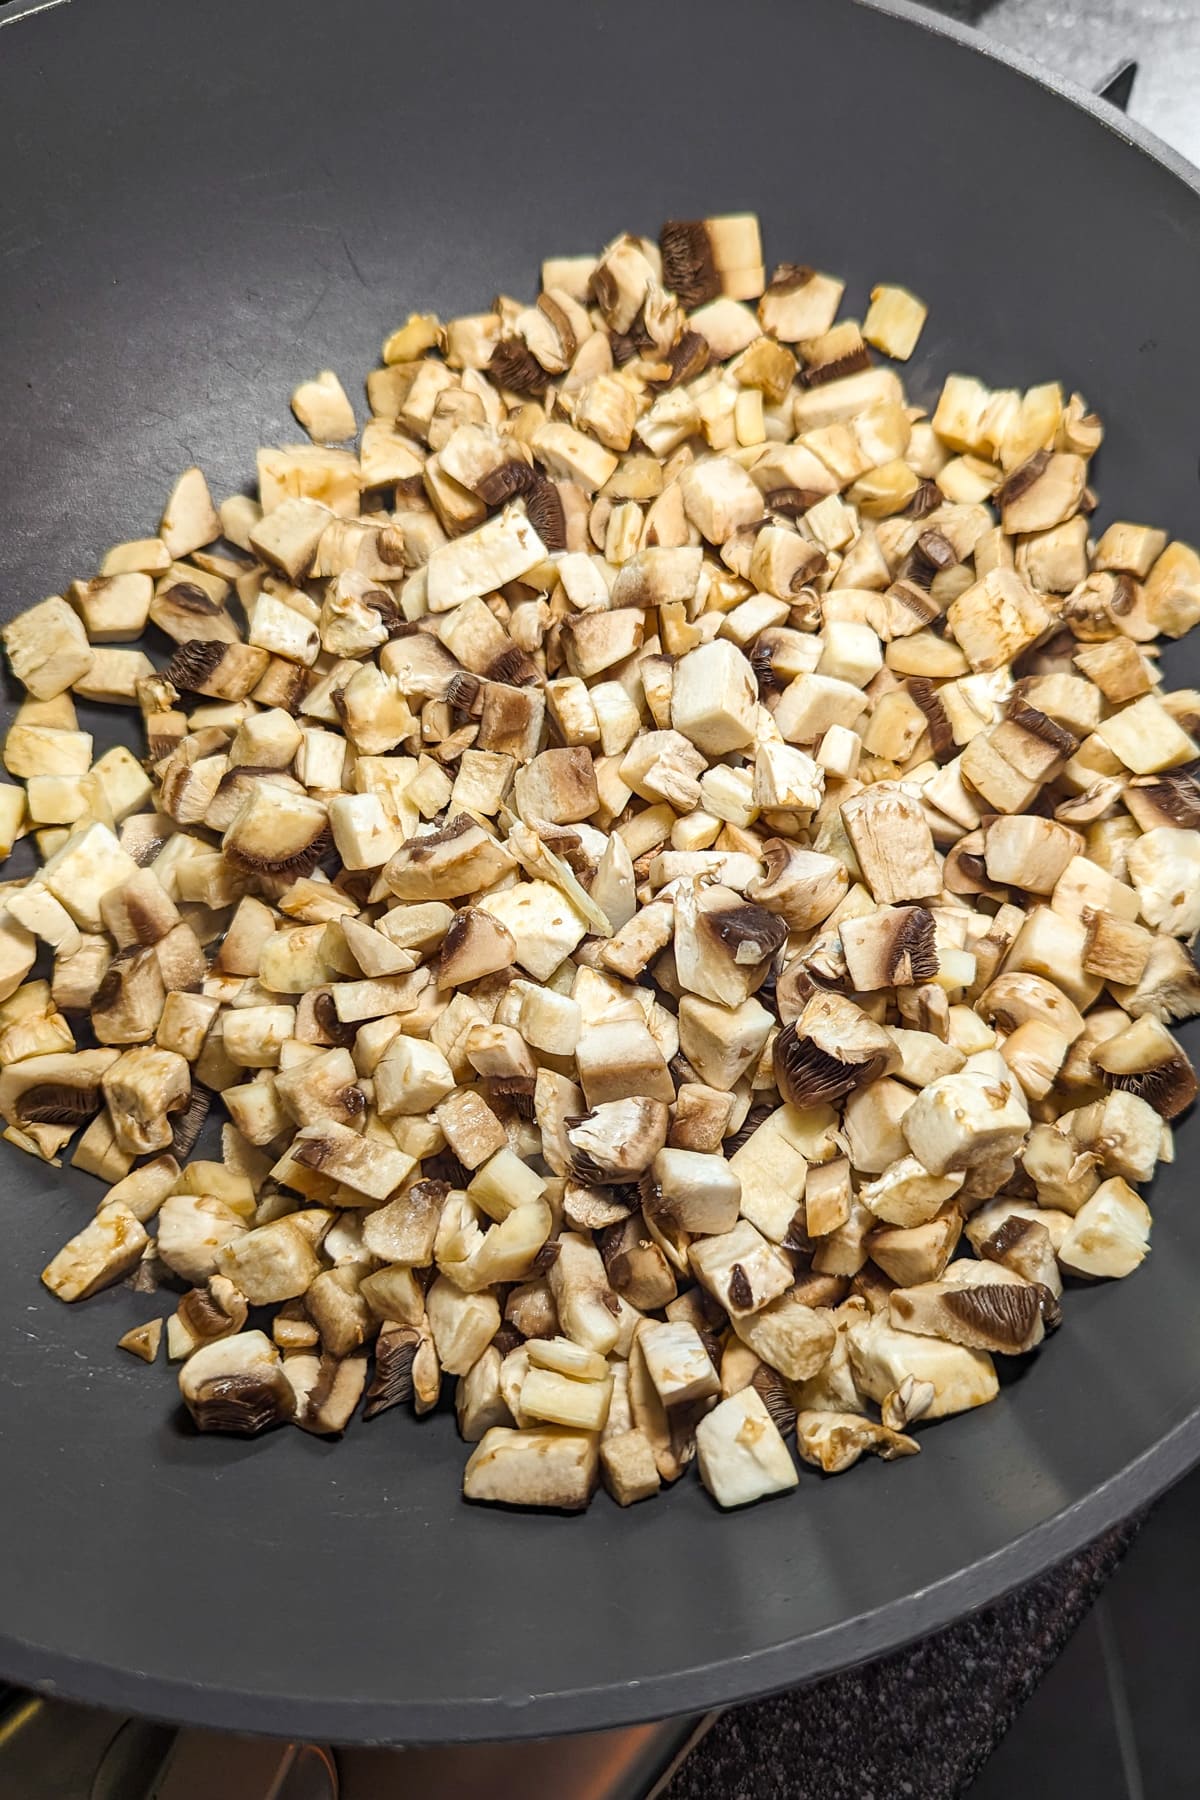 A large wok on the stovetop with small cubes of mushrooms.